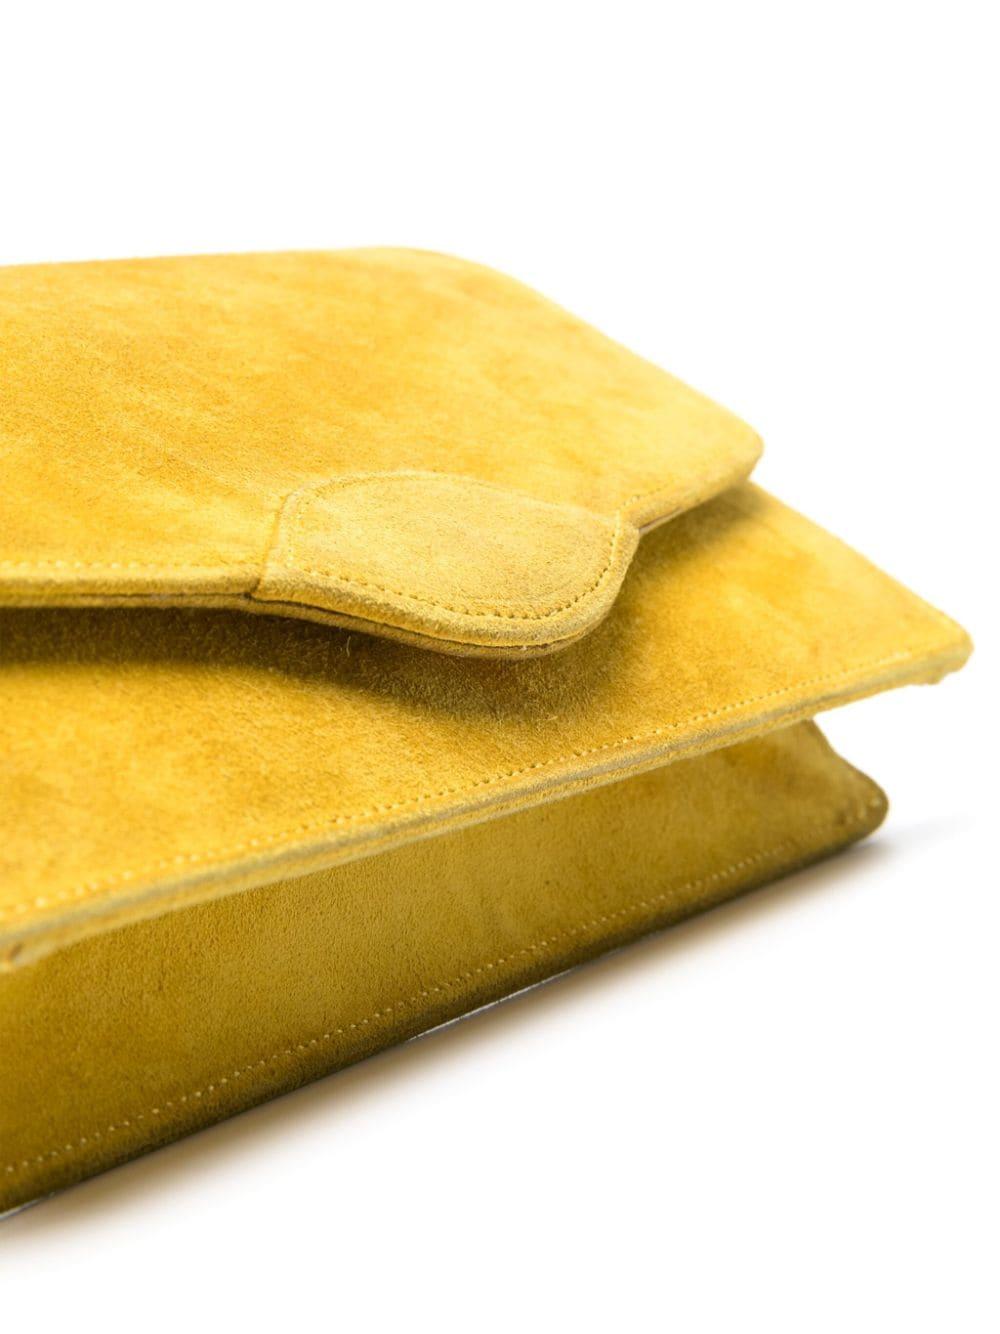 1970s Hermes Yellow Suede Clutch Bag In Good Condition For Sale In Paris, FR